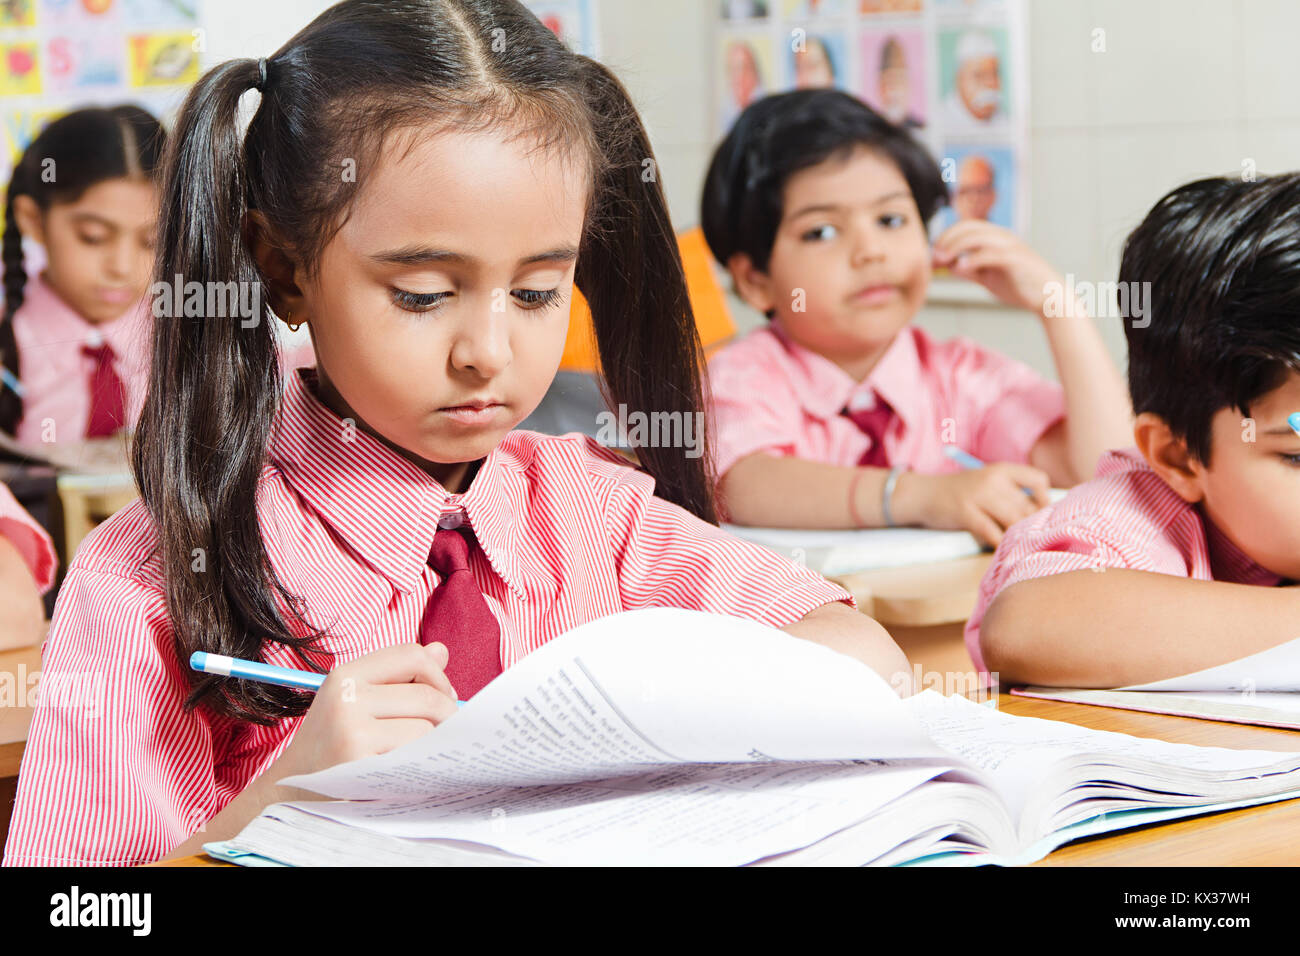 Indian School Childrens Friends Book Studying Education In Classroom Stock Photo